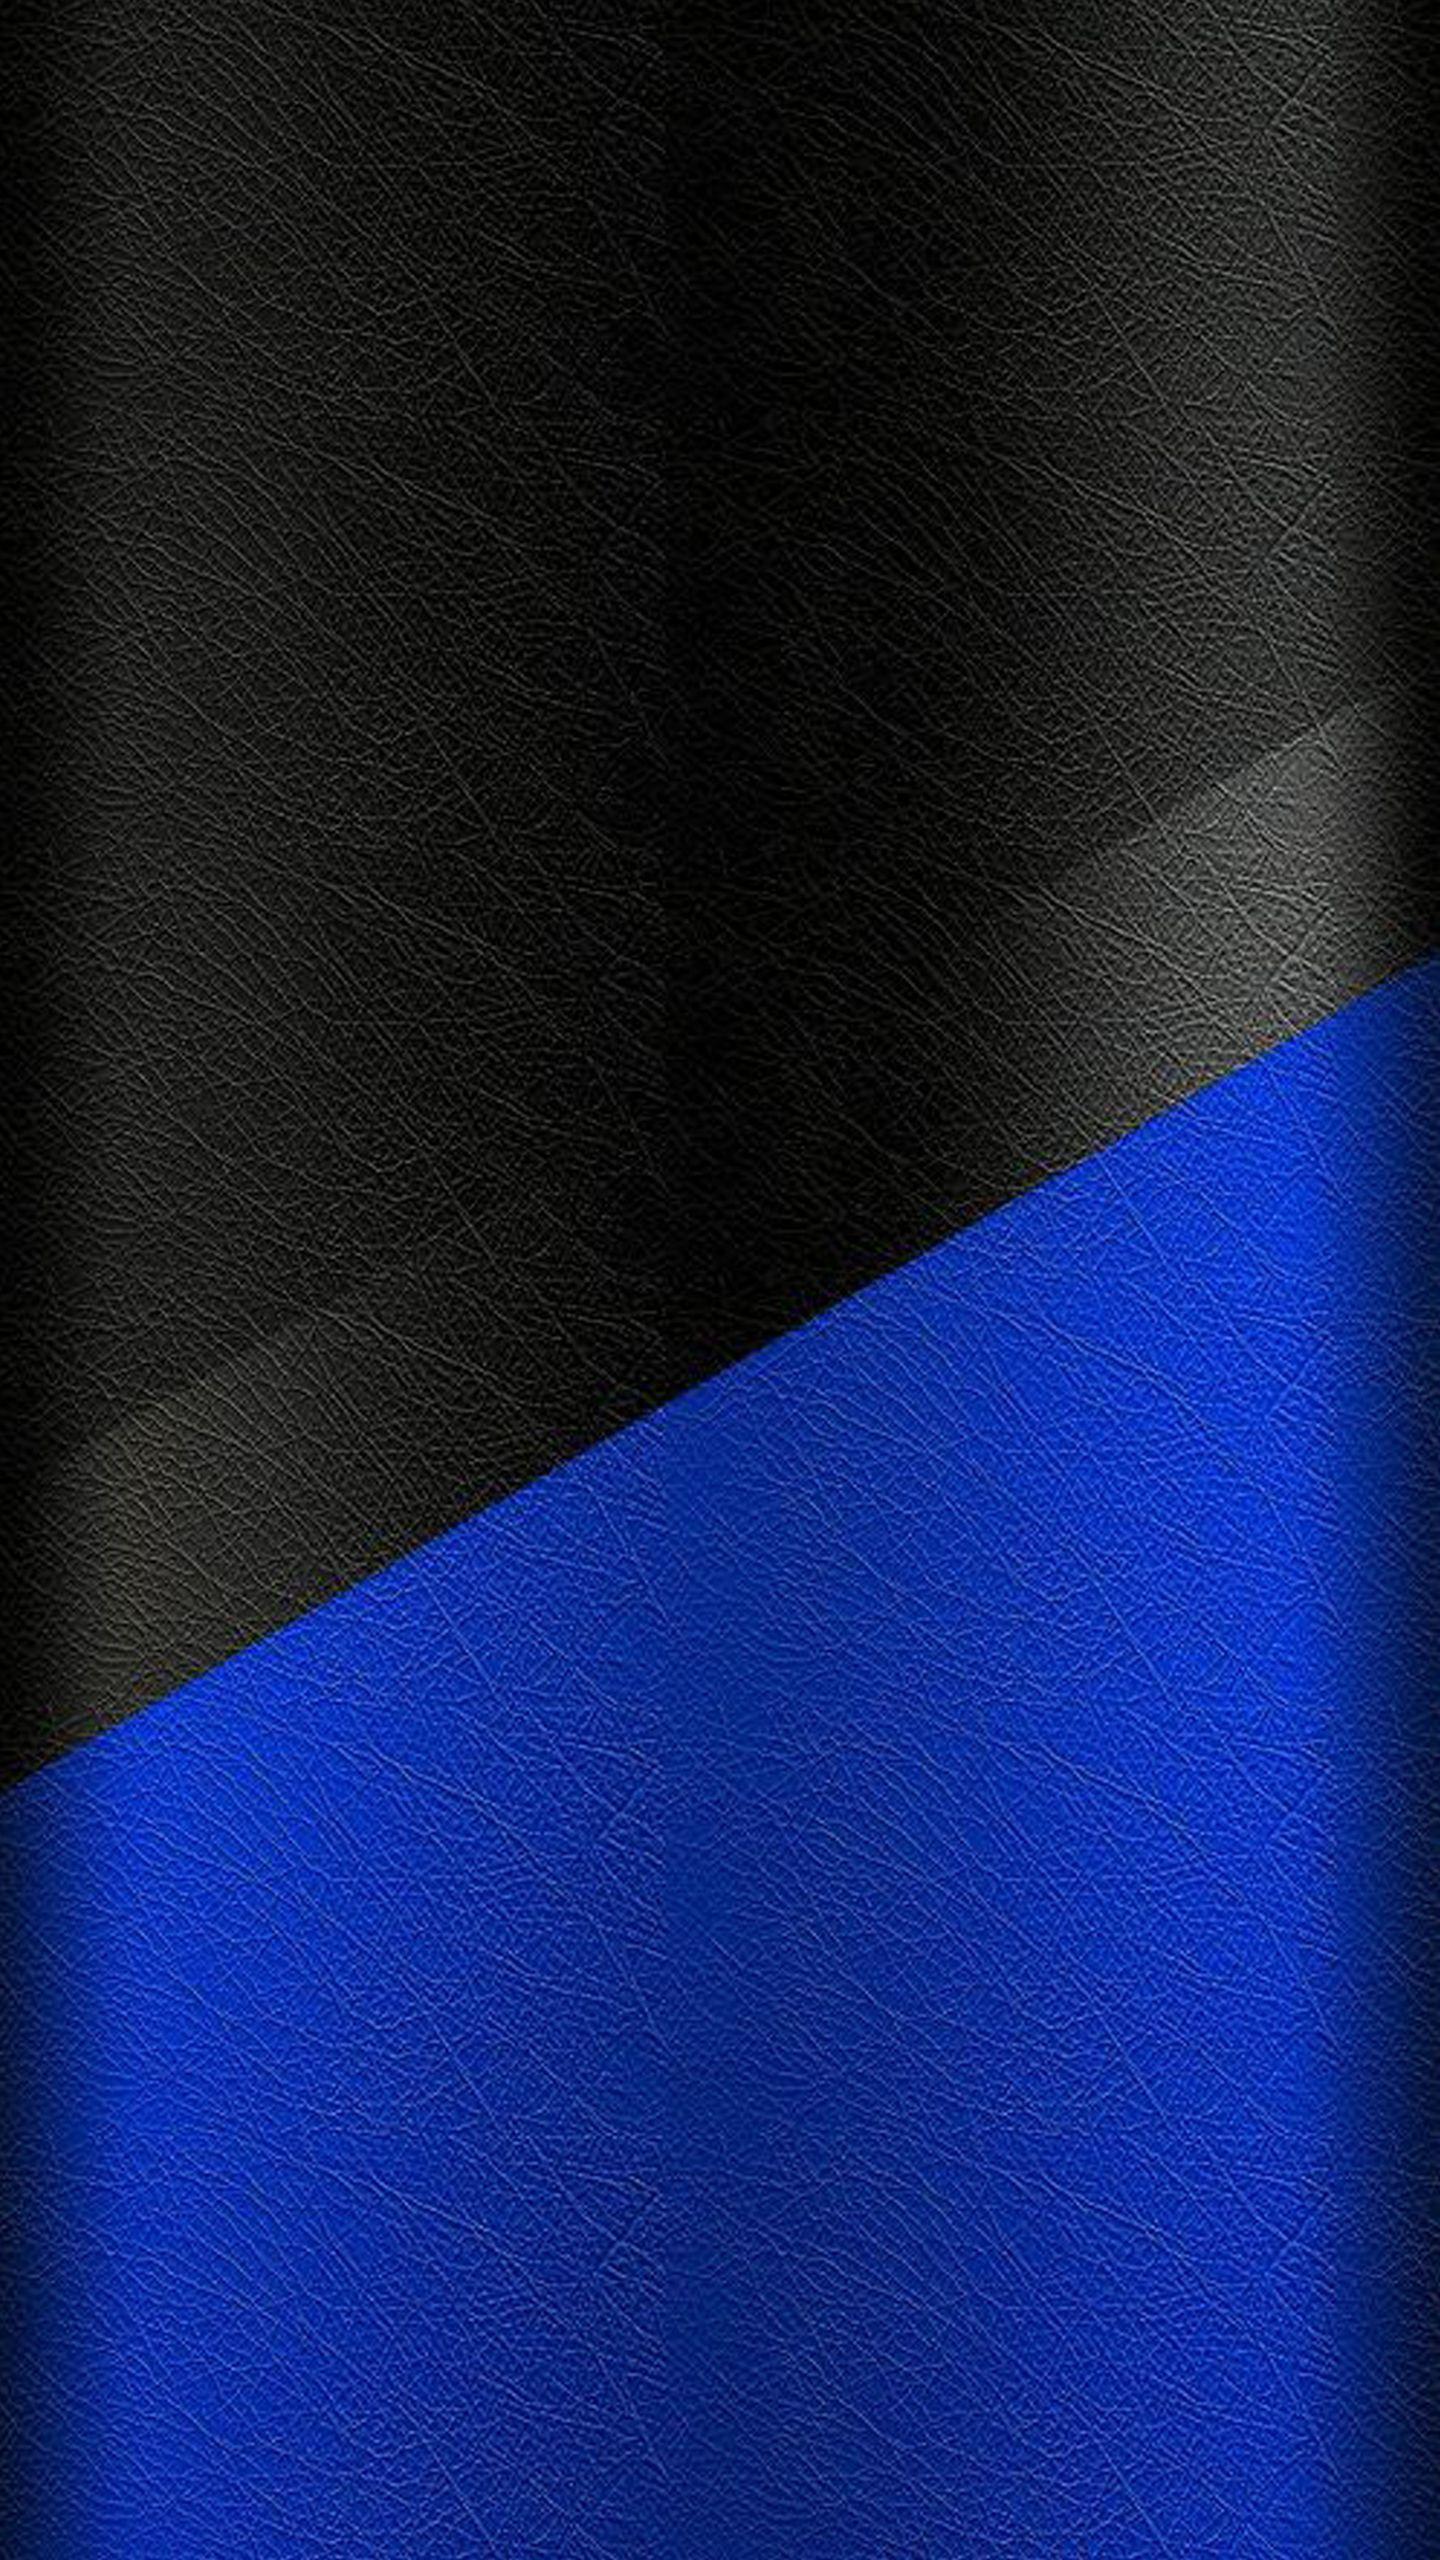 Dark S7 Edge Wallpaper 02 and Blue Leather Pattern